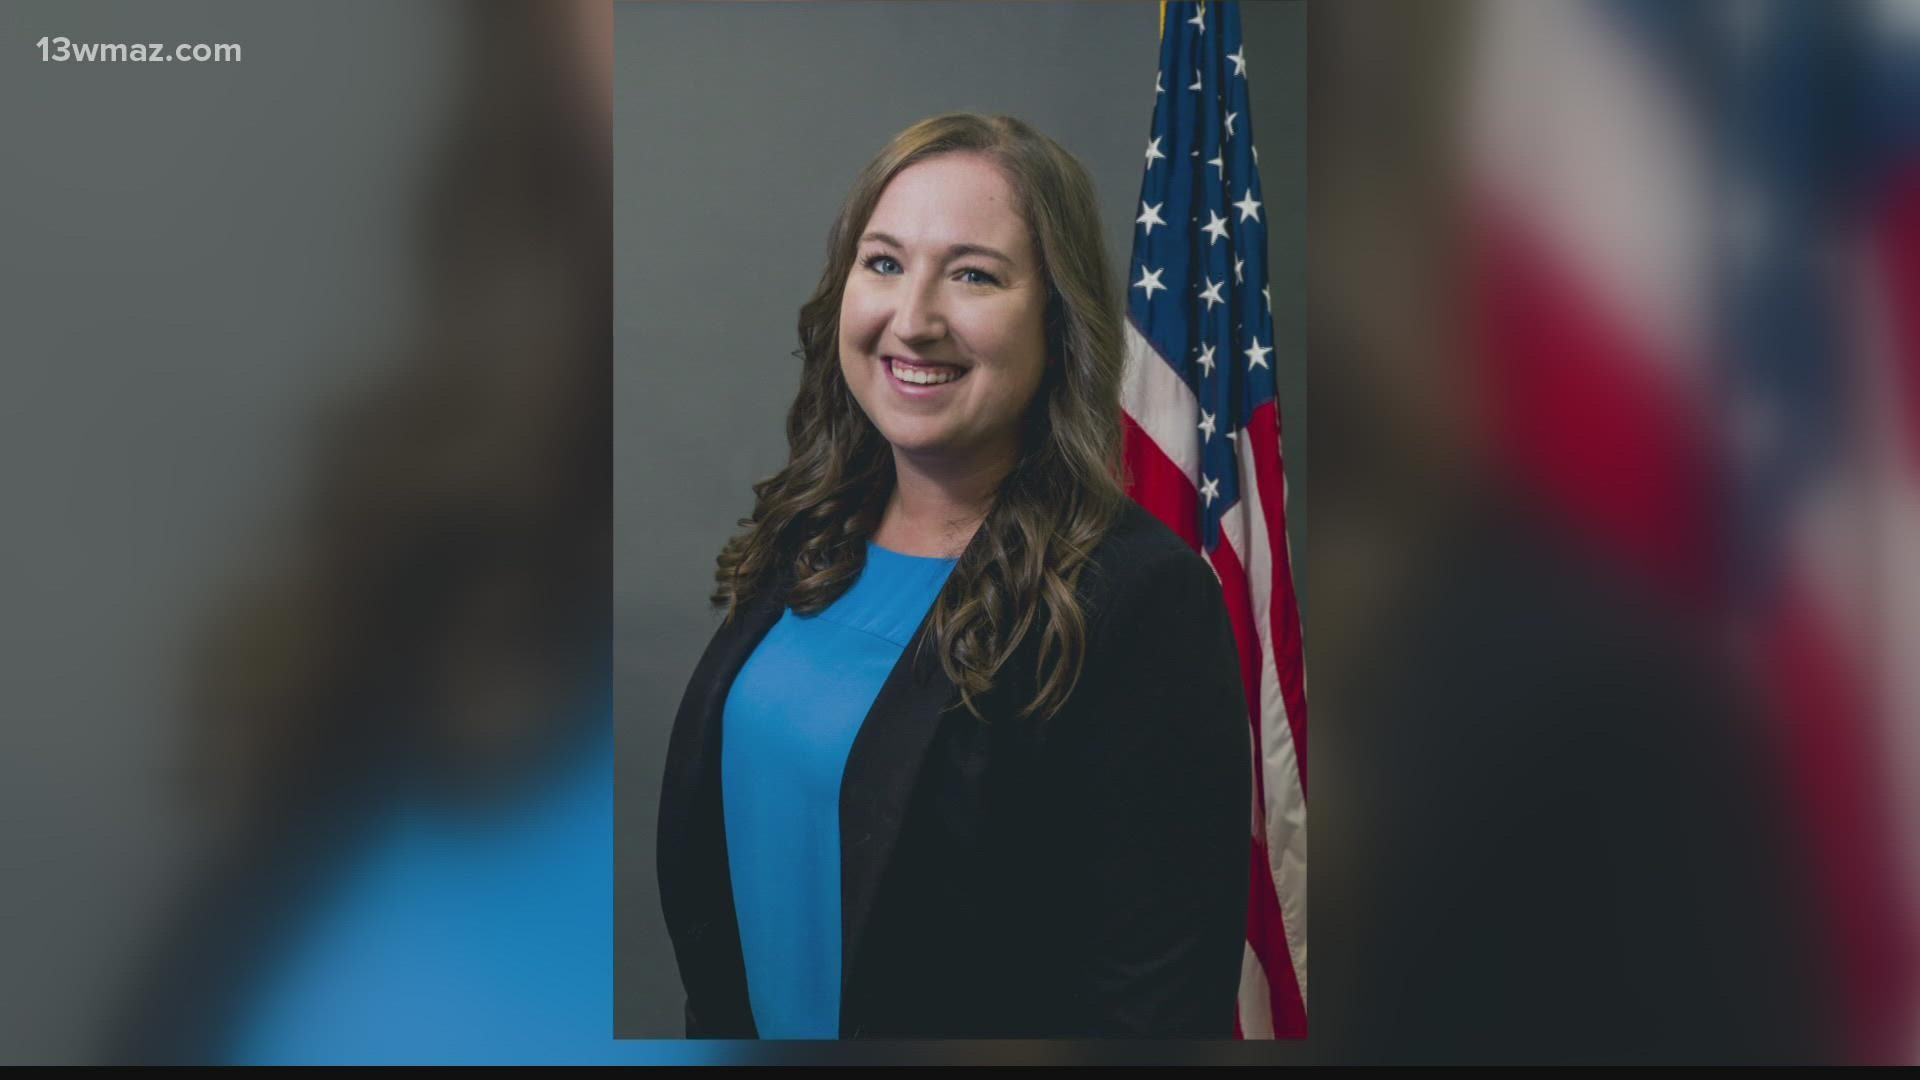 The City of Warner Robins says it has big plans for the community and for economic development. To help get them accomplished, they've hired a familiar face